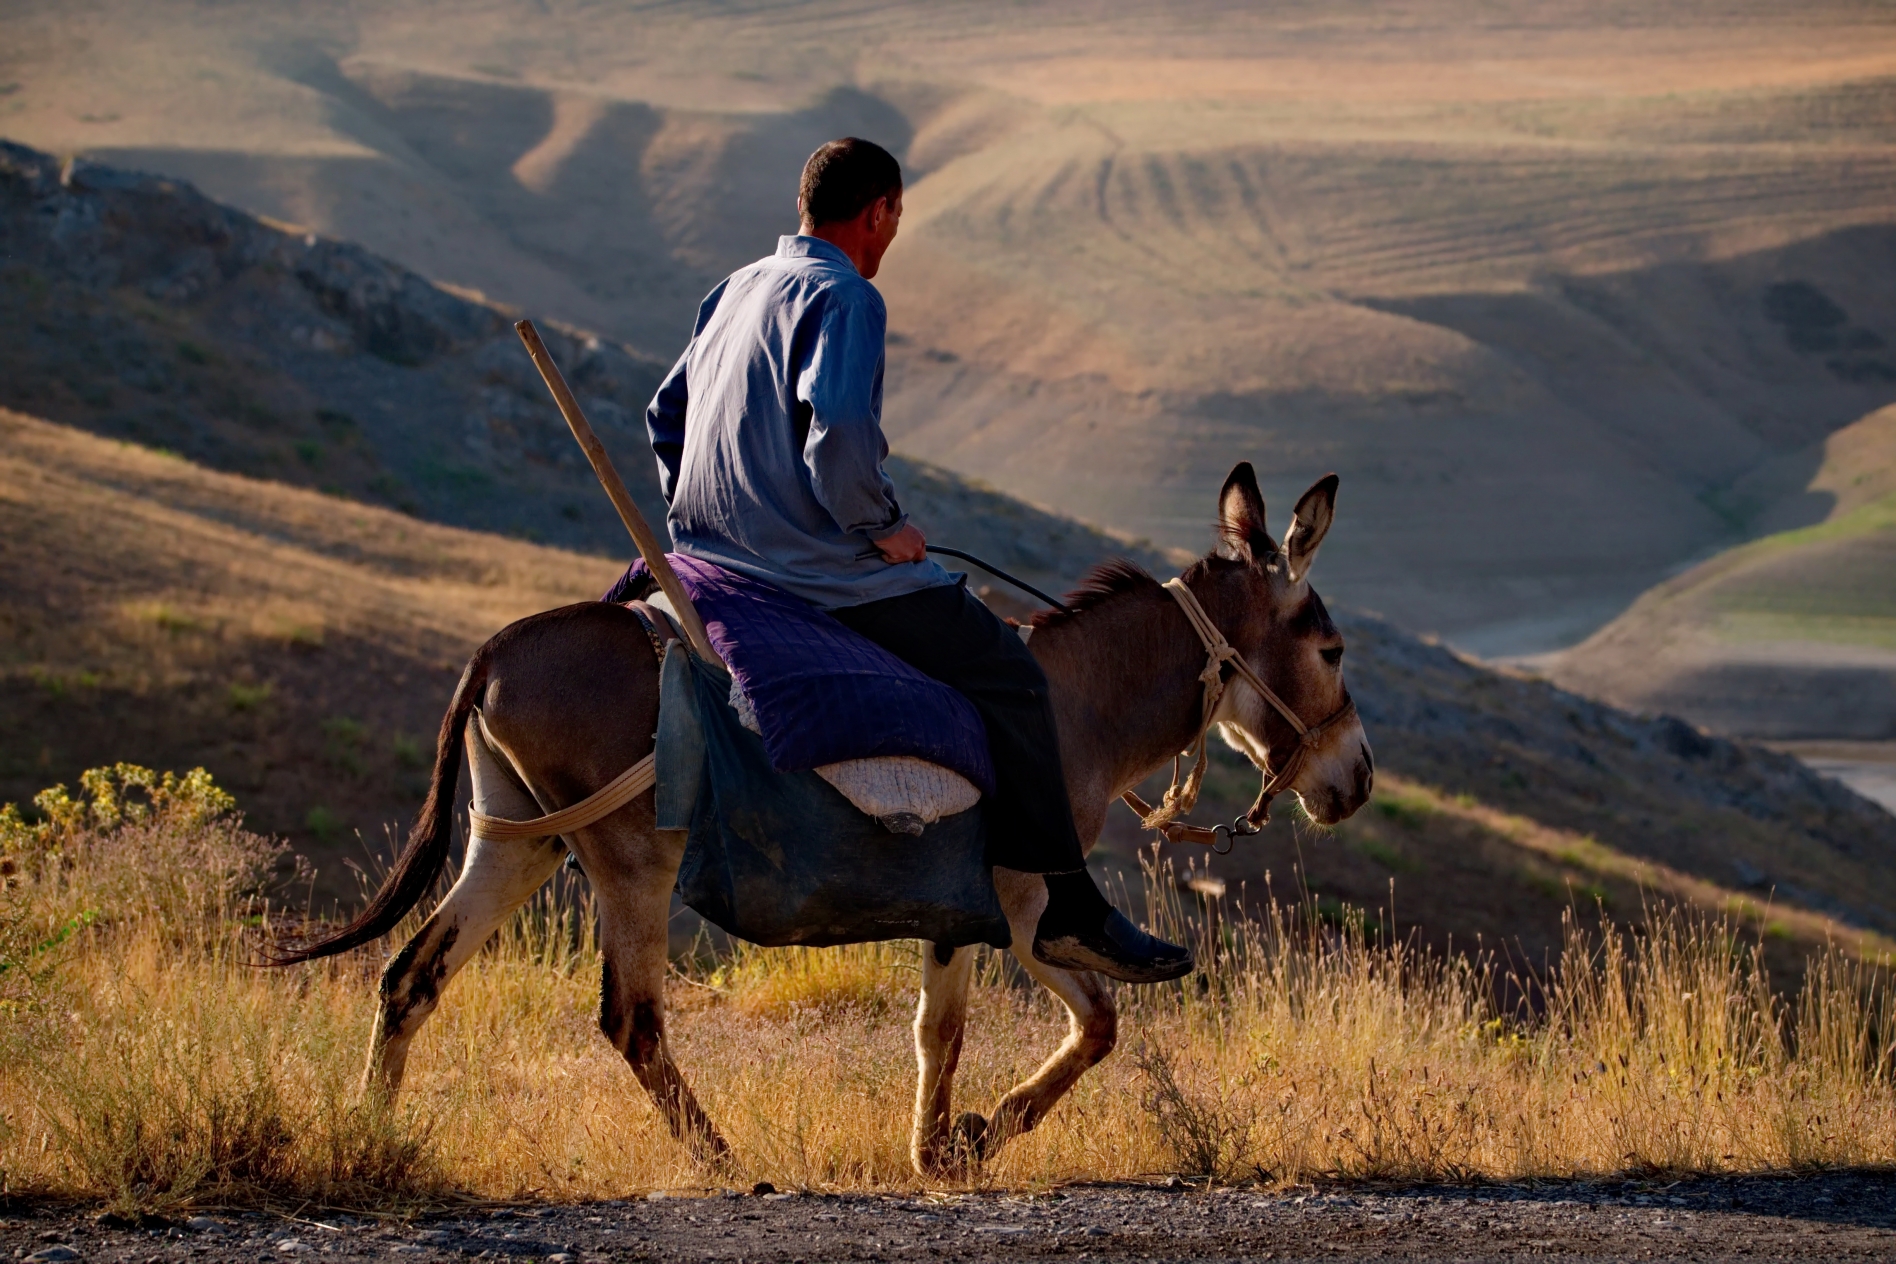 To reduce urban-rural divide, Central Asia must embrace freedom of movement